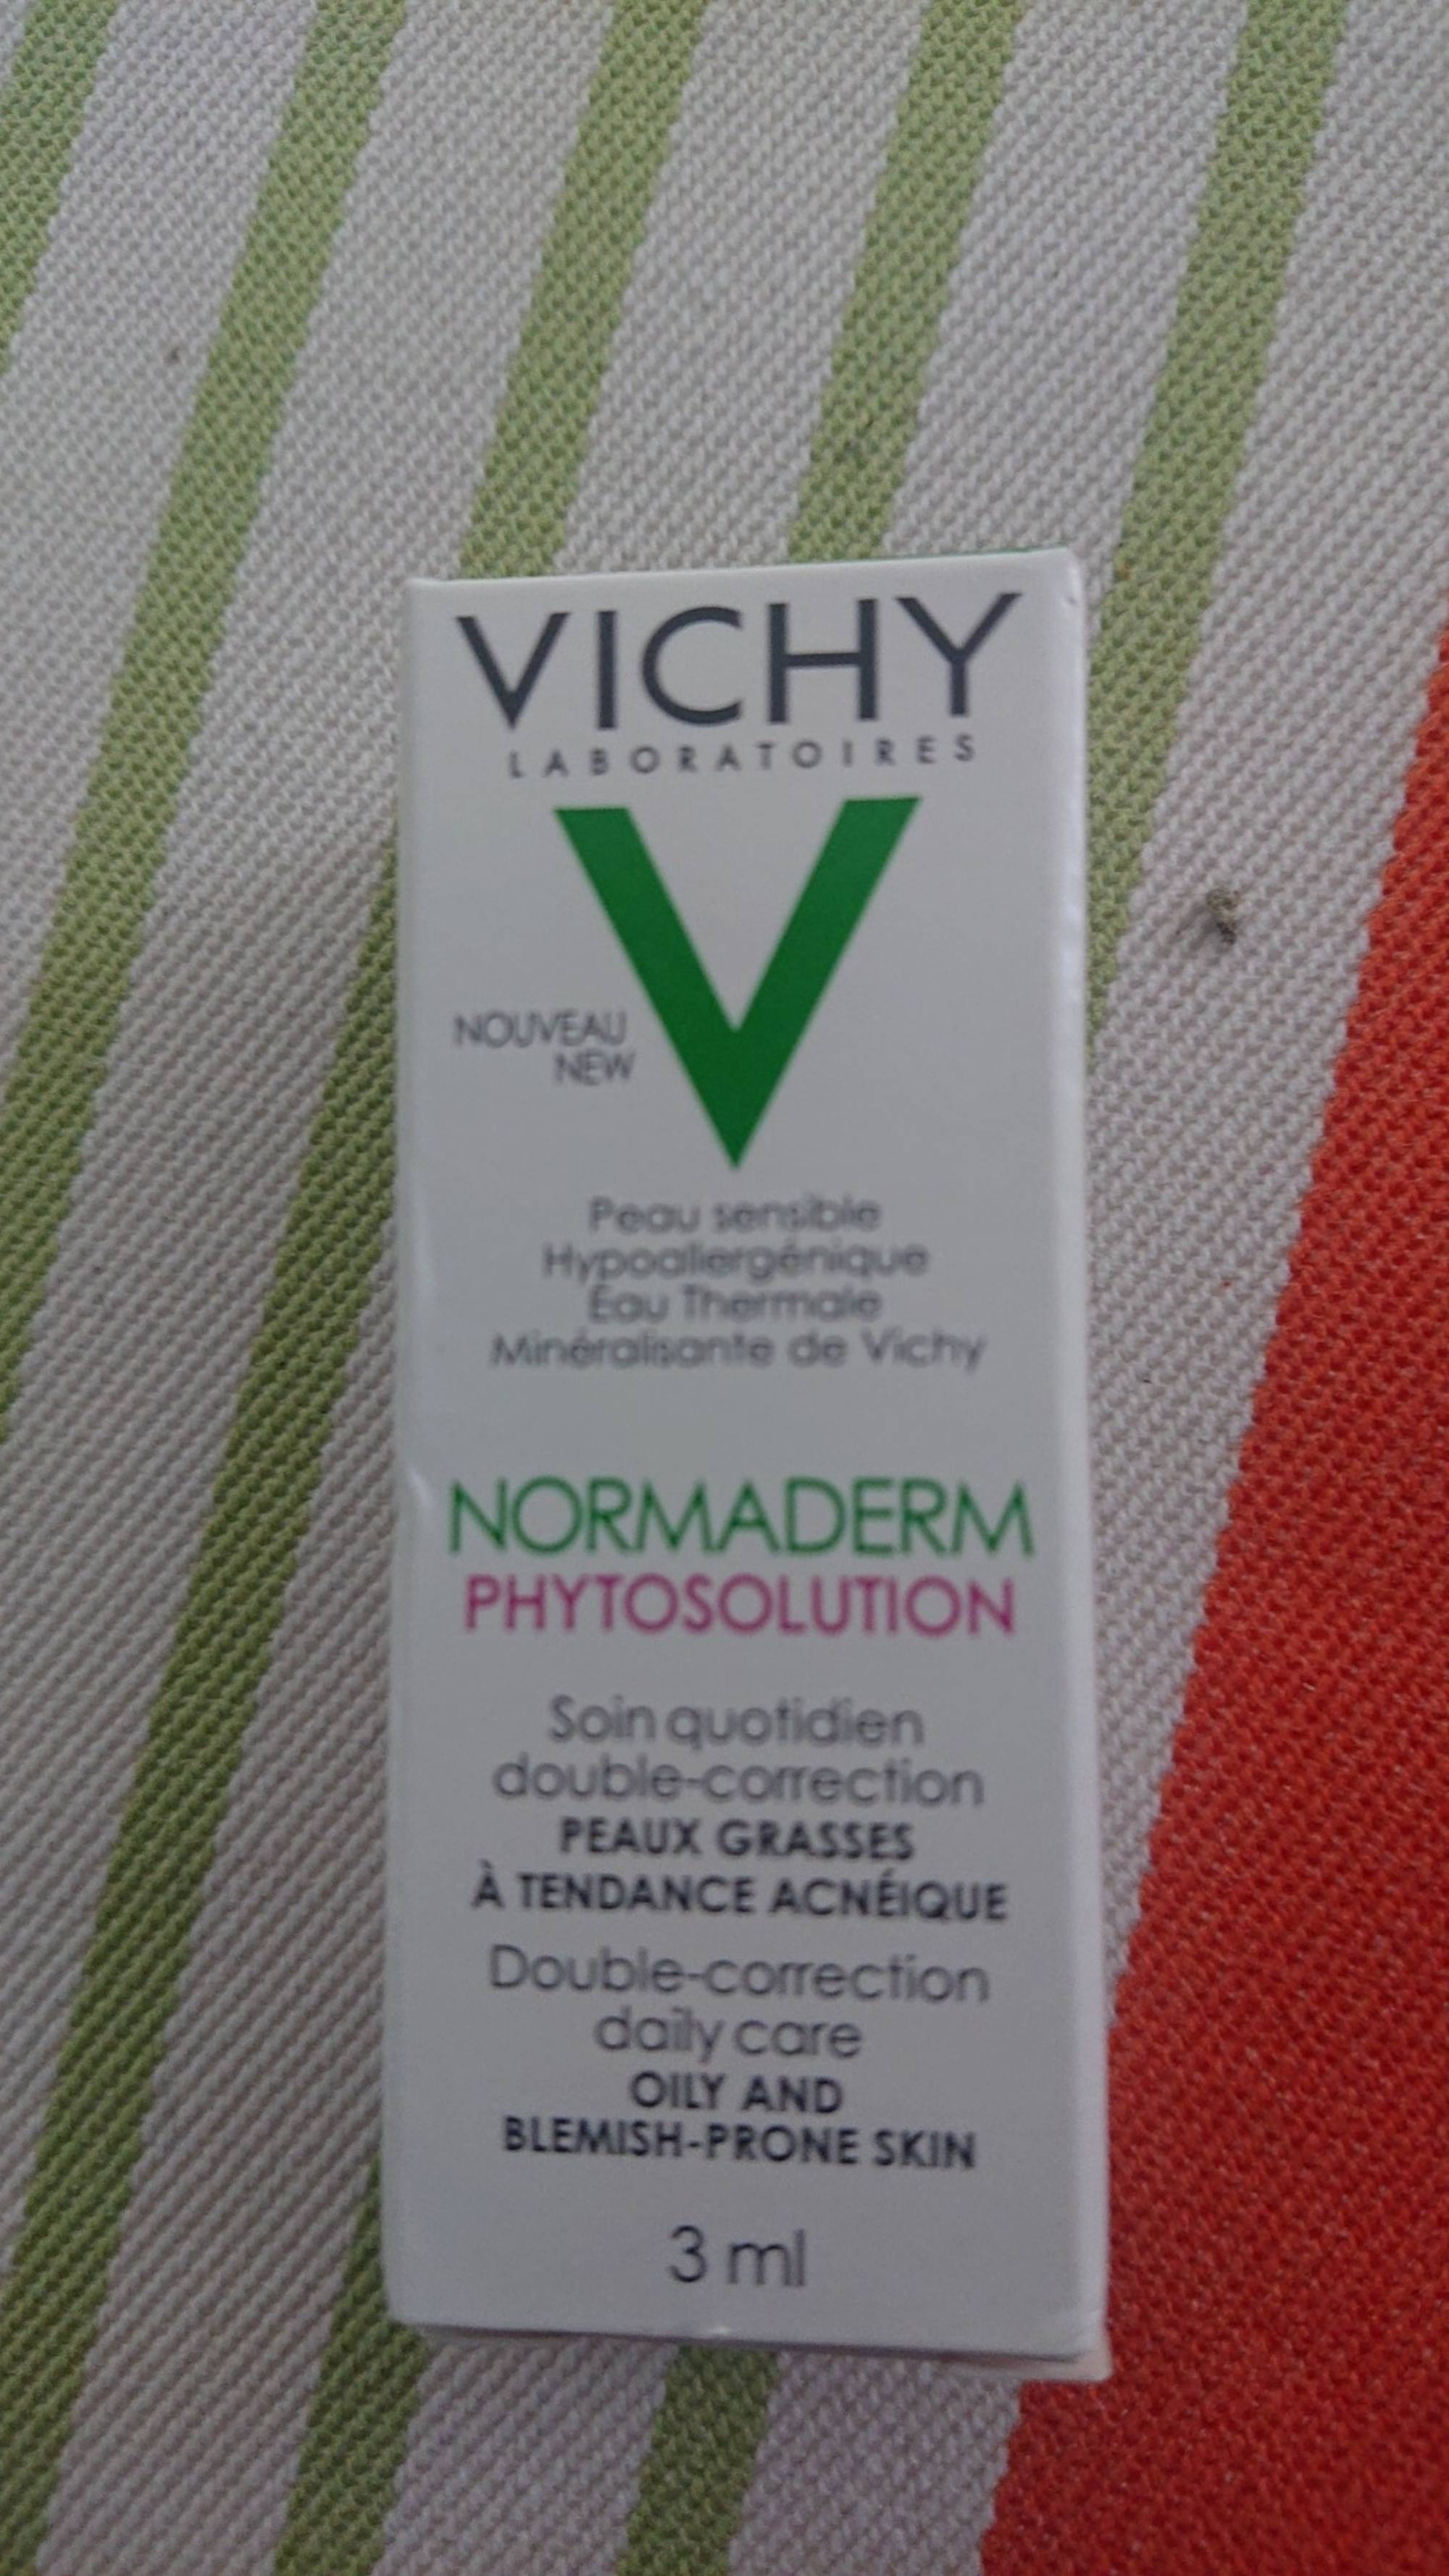 VICHY - Normaderm Phytosolution - Soin quotidien